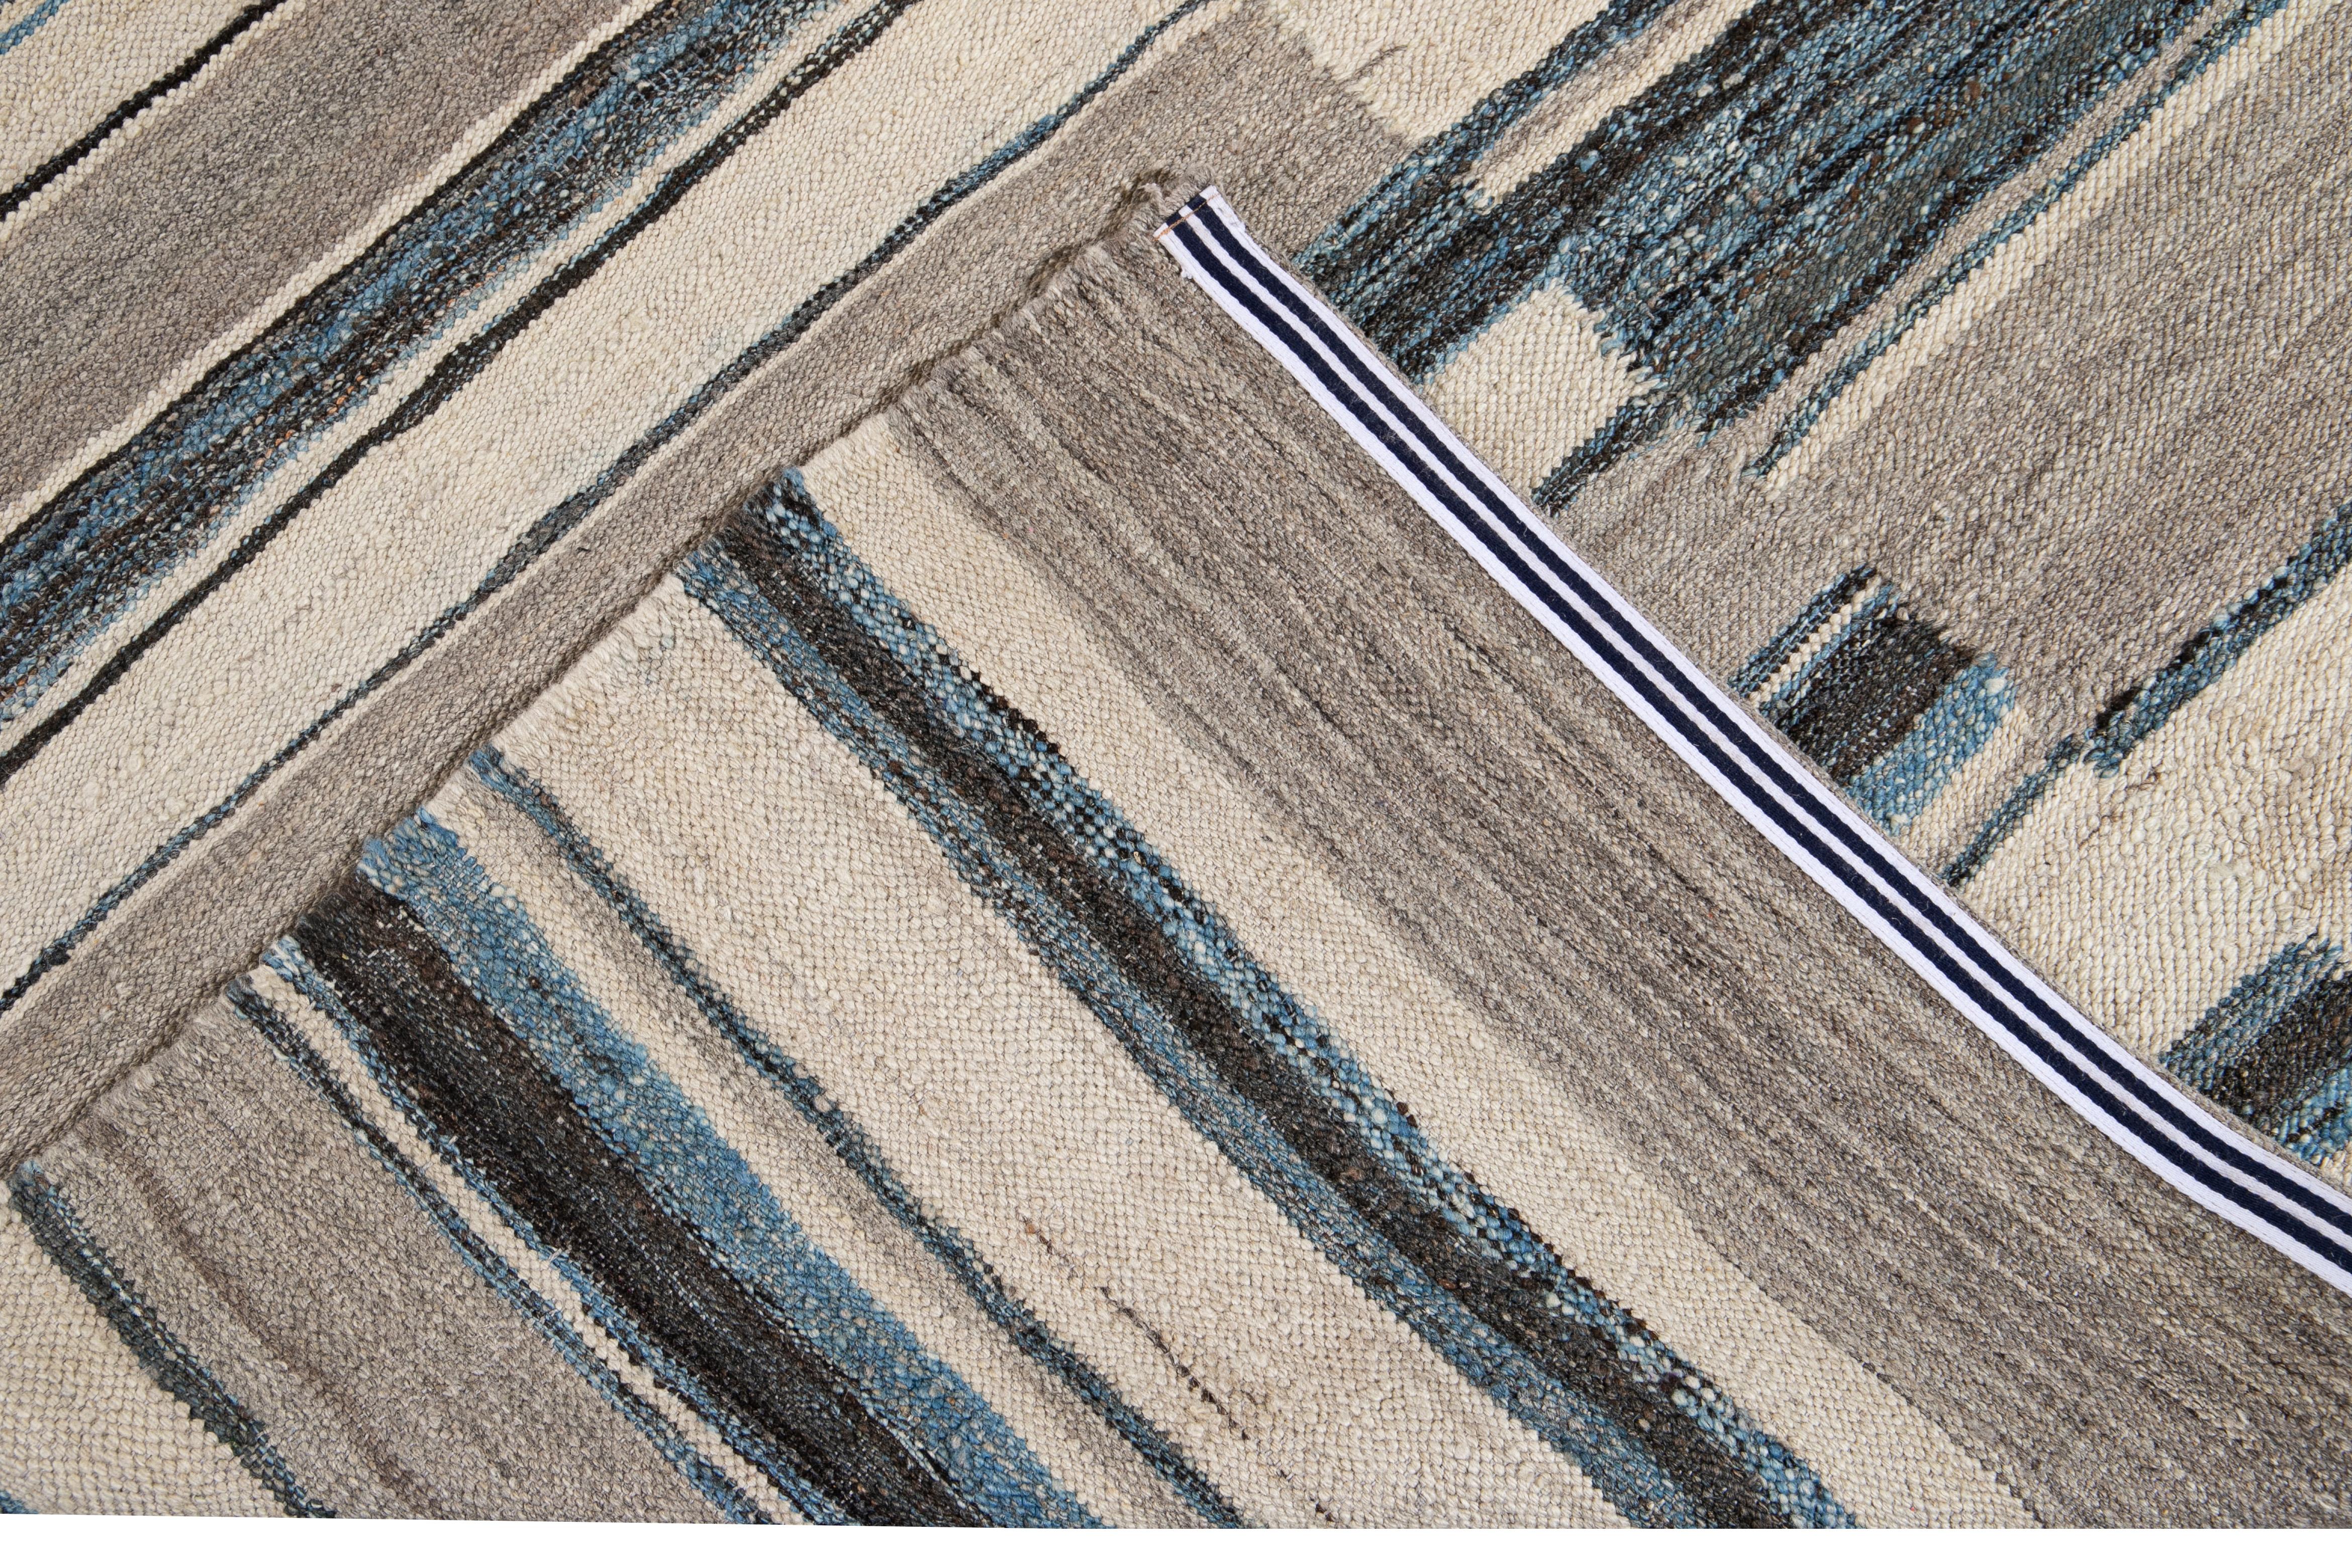 Beautiful modern flat-weave handmade wool rug. This Kilim rug has a beige field with accents of blue and brown in a gorgeous geometric expressionist design.

This rug measures: 9' x 12'1